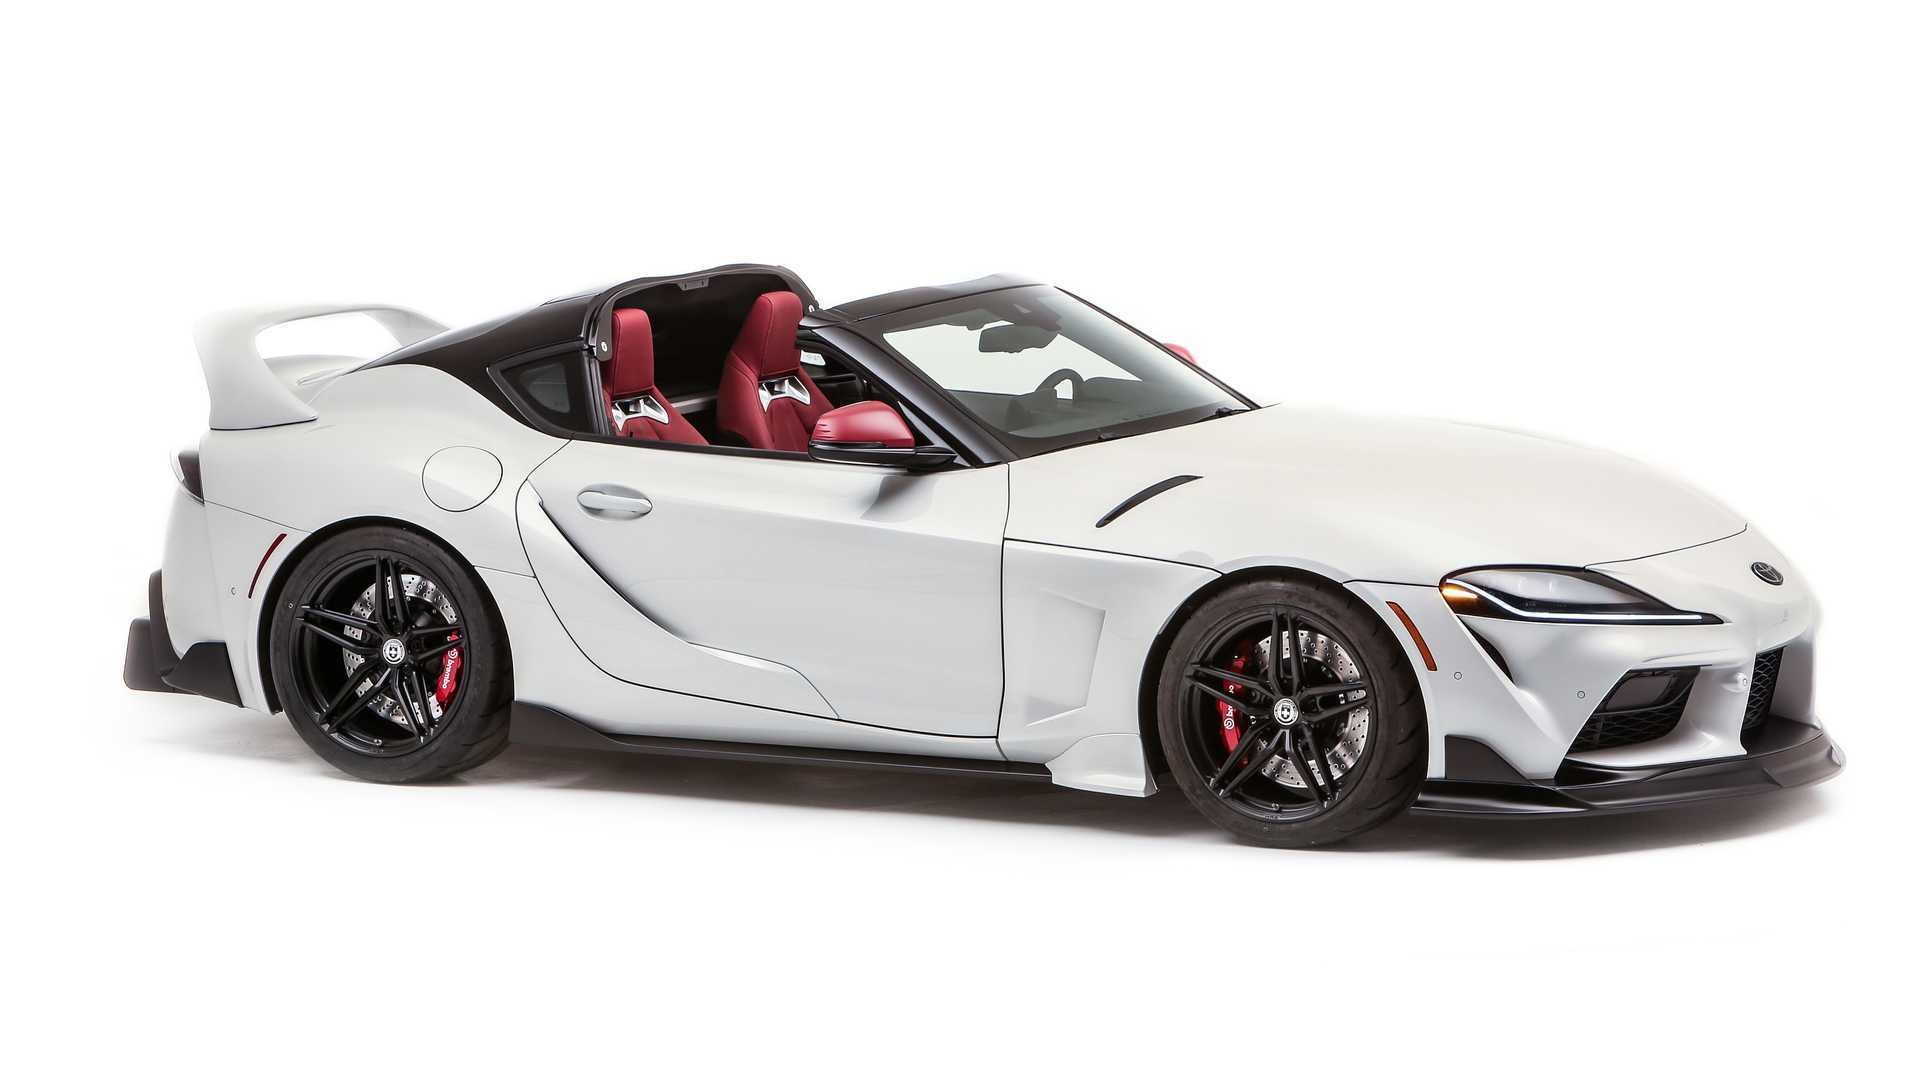 Toyota GR Supra Sport Top Revealed As A Targa Nod To The Past